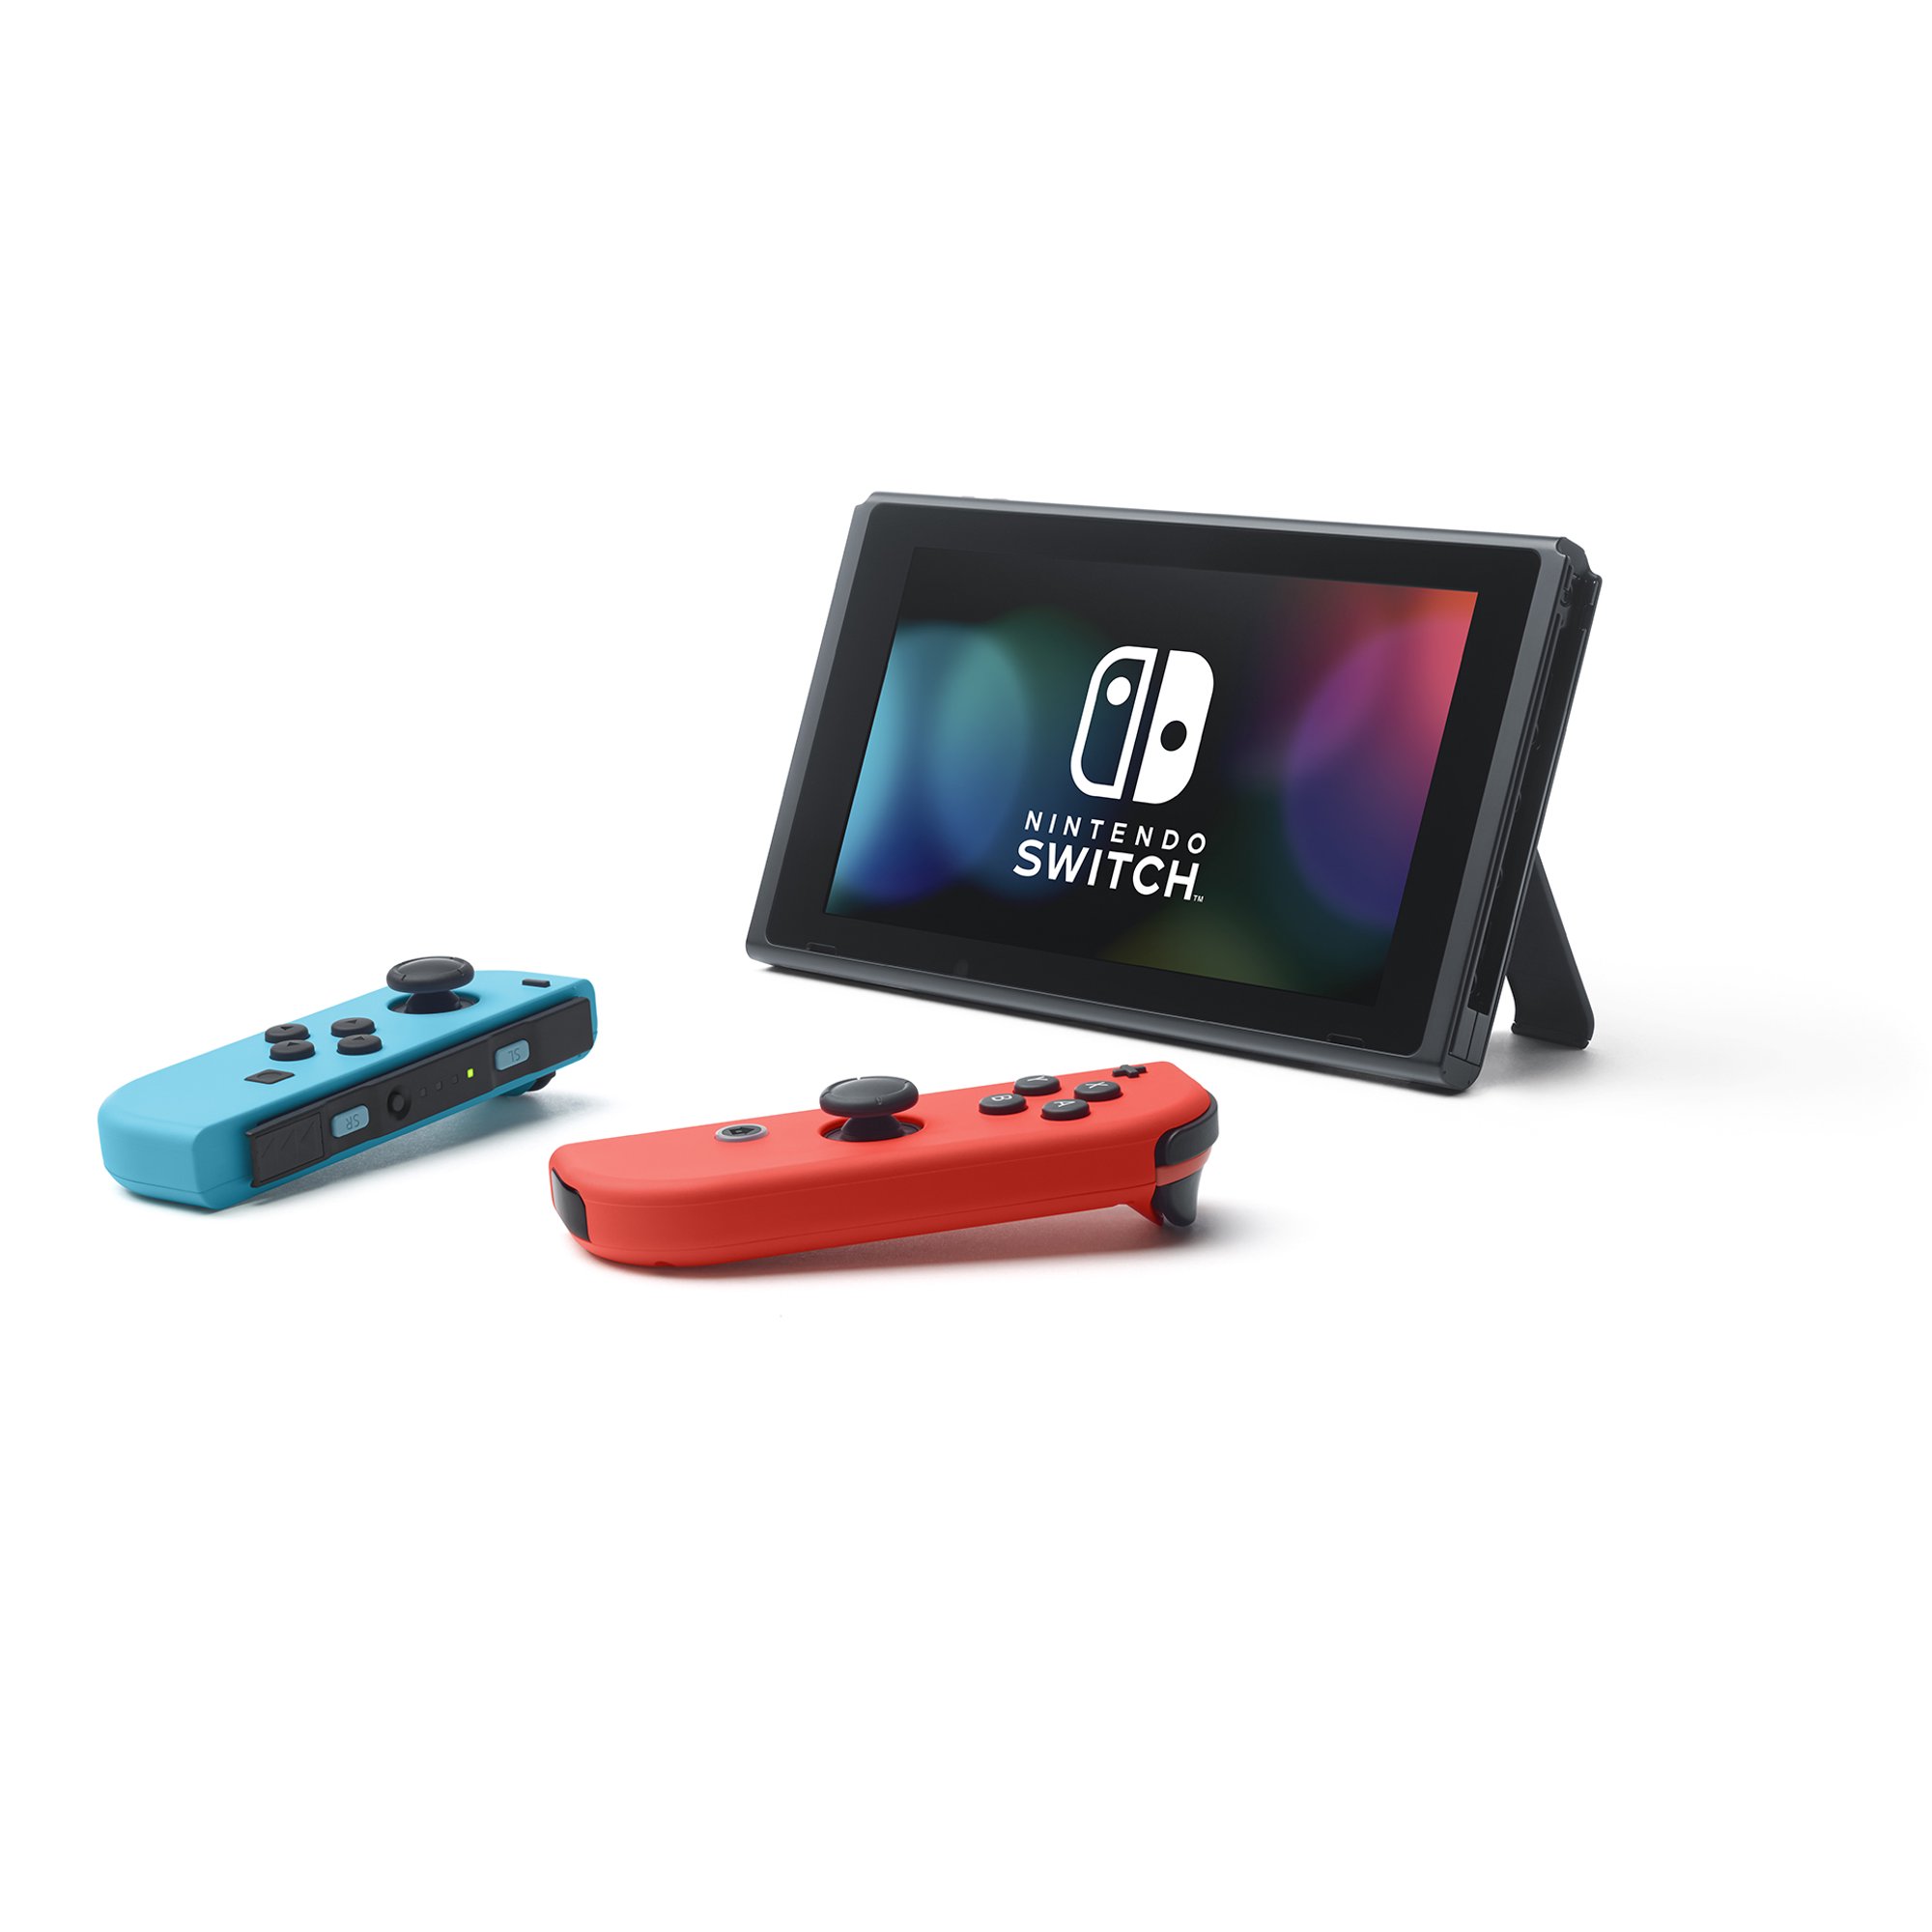 Nintendo Switch Joy-Con Neon Blue/Red Console Bundle: Mario Kart 8 Deluxe Full Game Download | 3 Months Nintendo Switch Online Membership with Mazepoly Cleaning Cloth - image 3 of 5